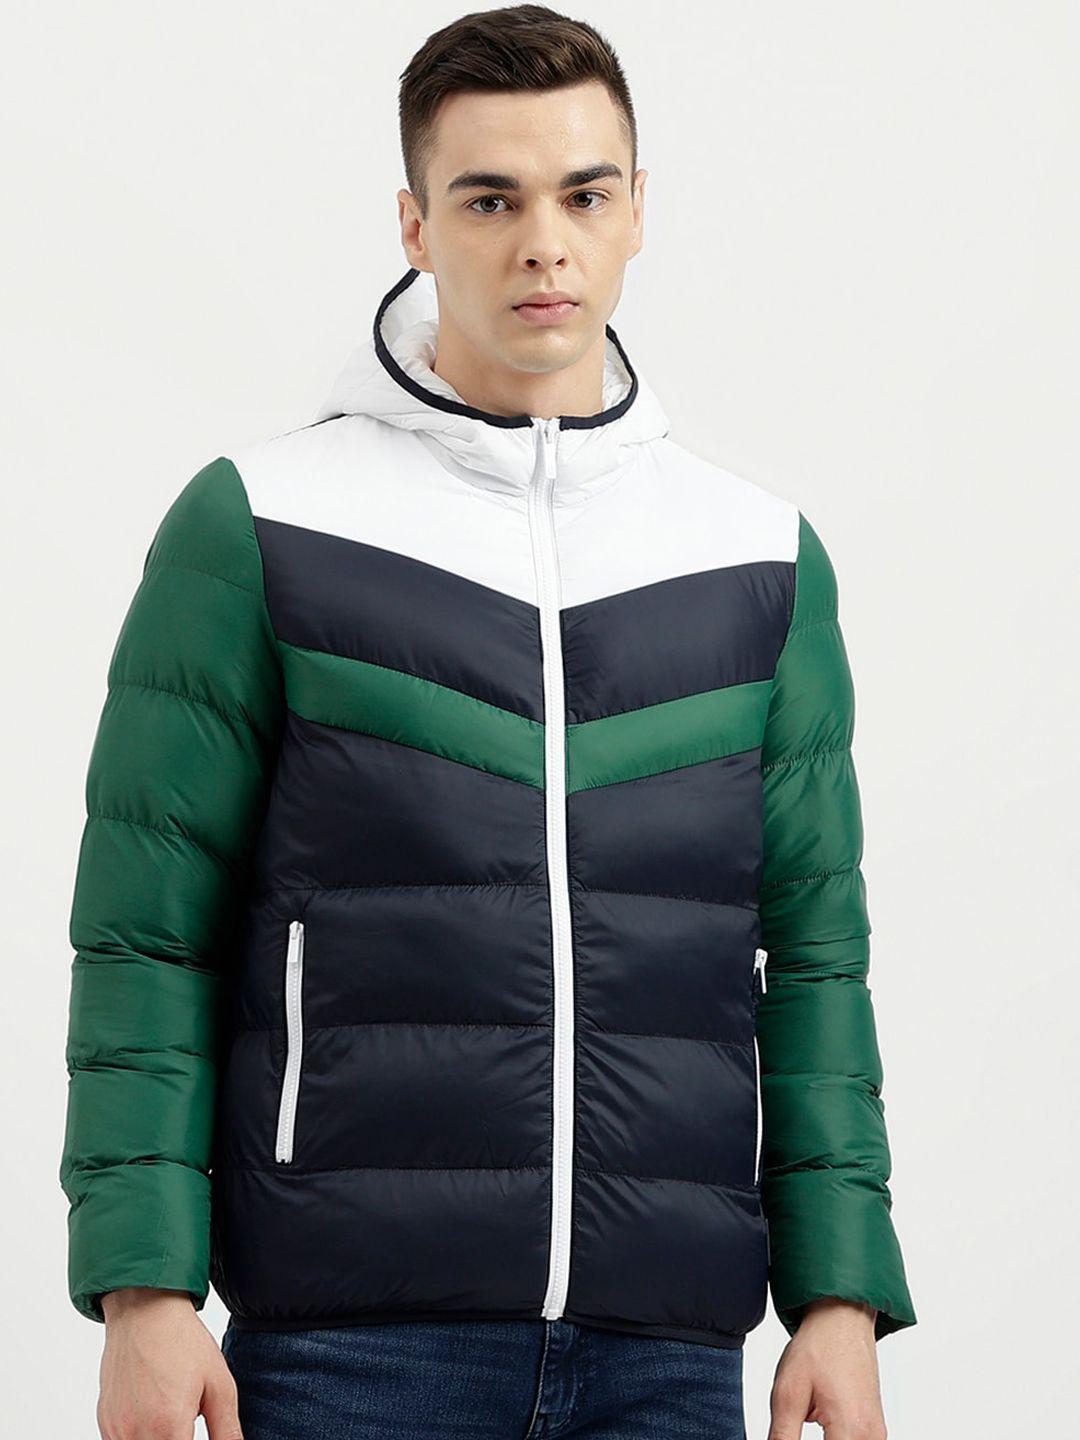 united-colors-of-benetton-hooded-colourblocked-puffer-jacket